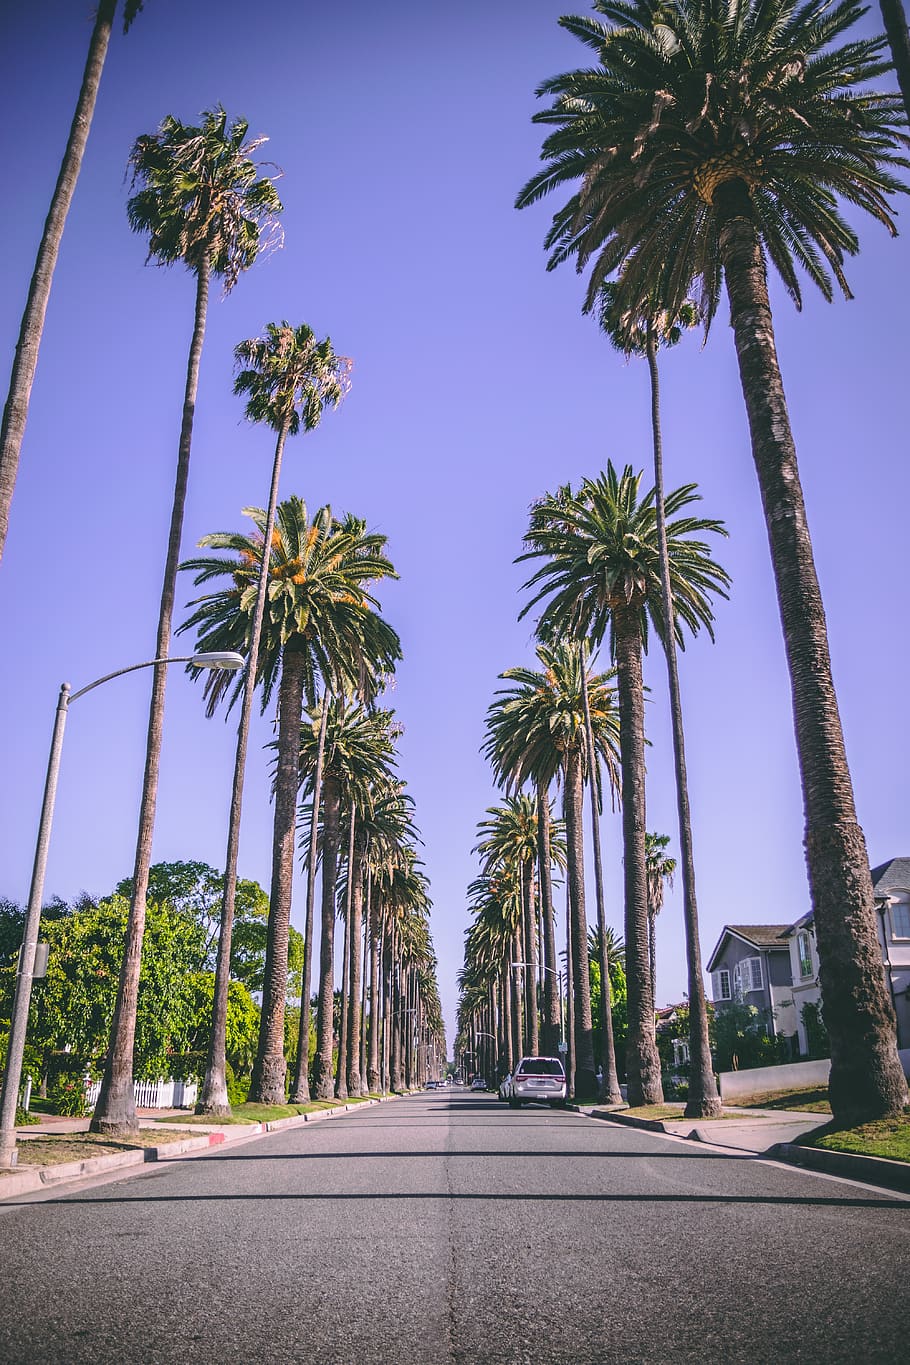 rodeo drive, united states, beverly hills, dope, cool, palm trees